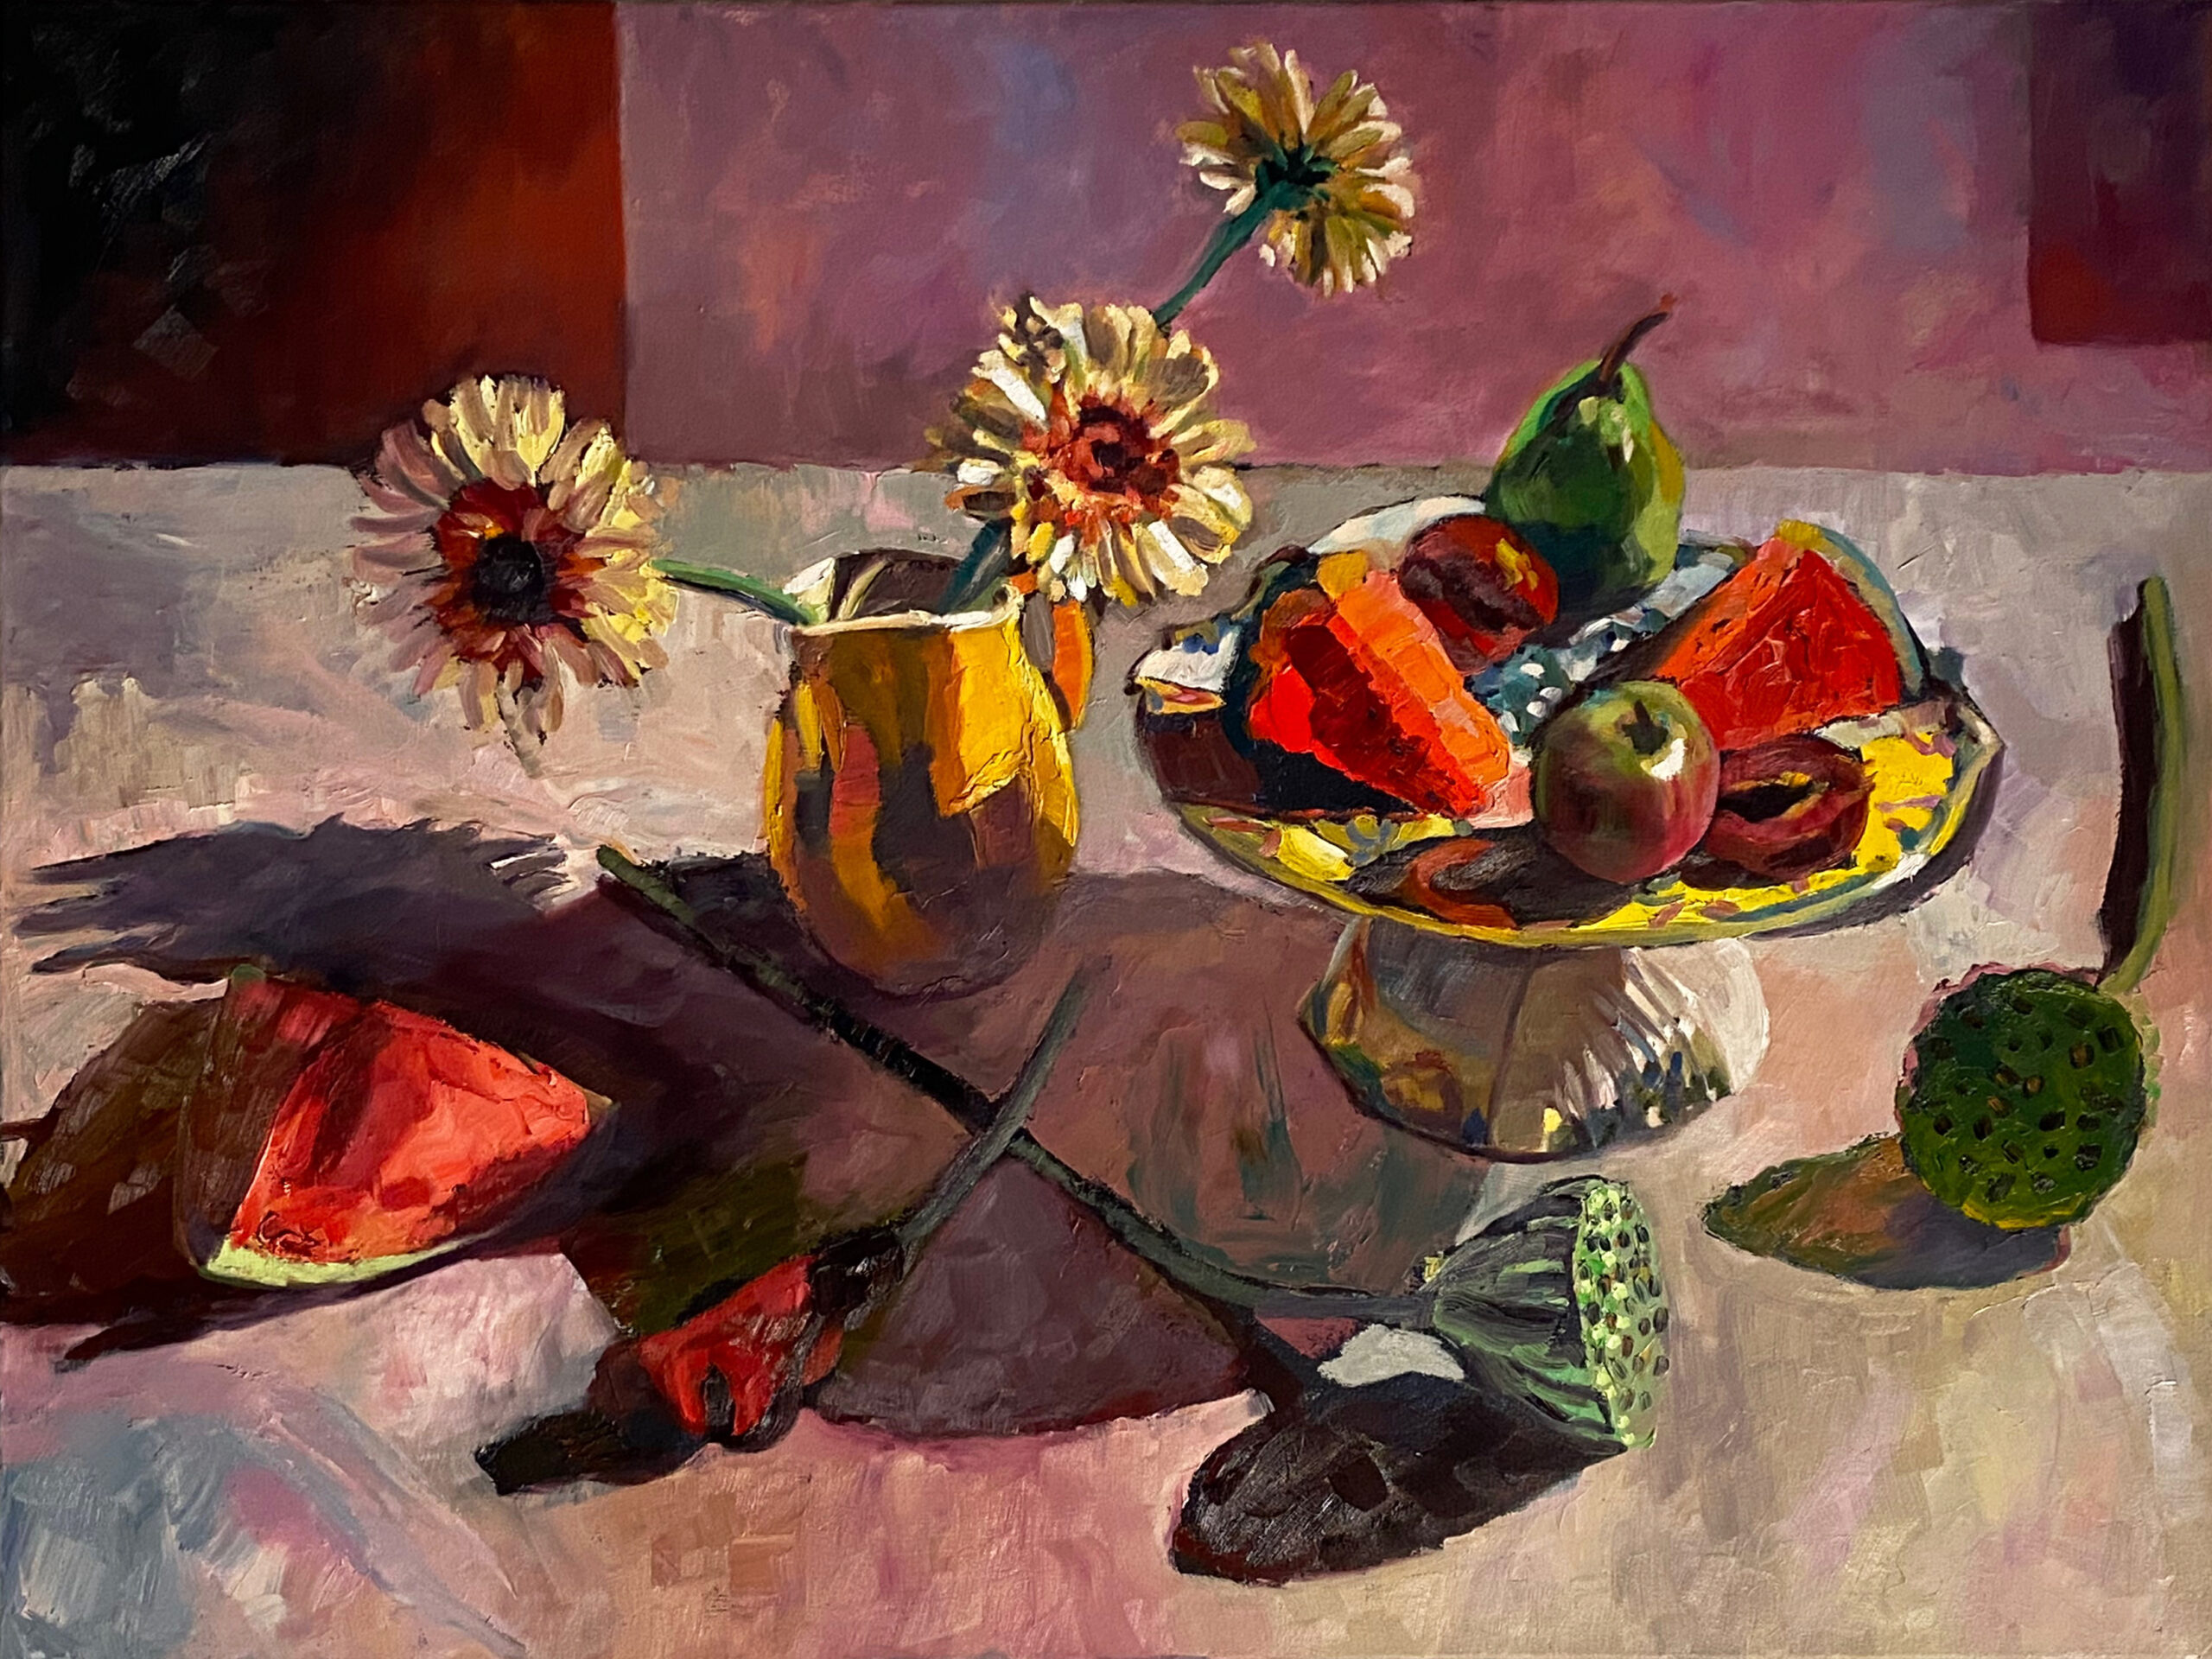 Rosemary Valadon 'Yellow Jug Fruit and Flowers' oil on linen 76 x 101cm $12,000